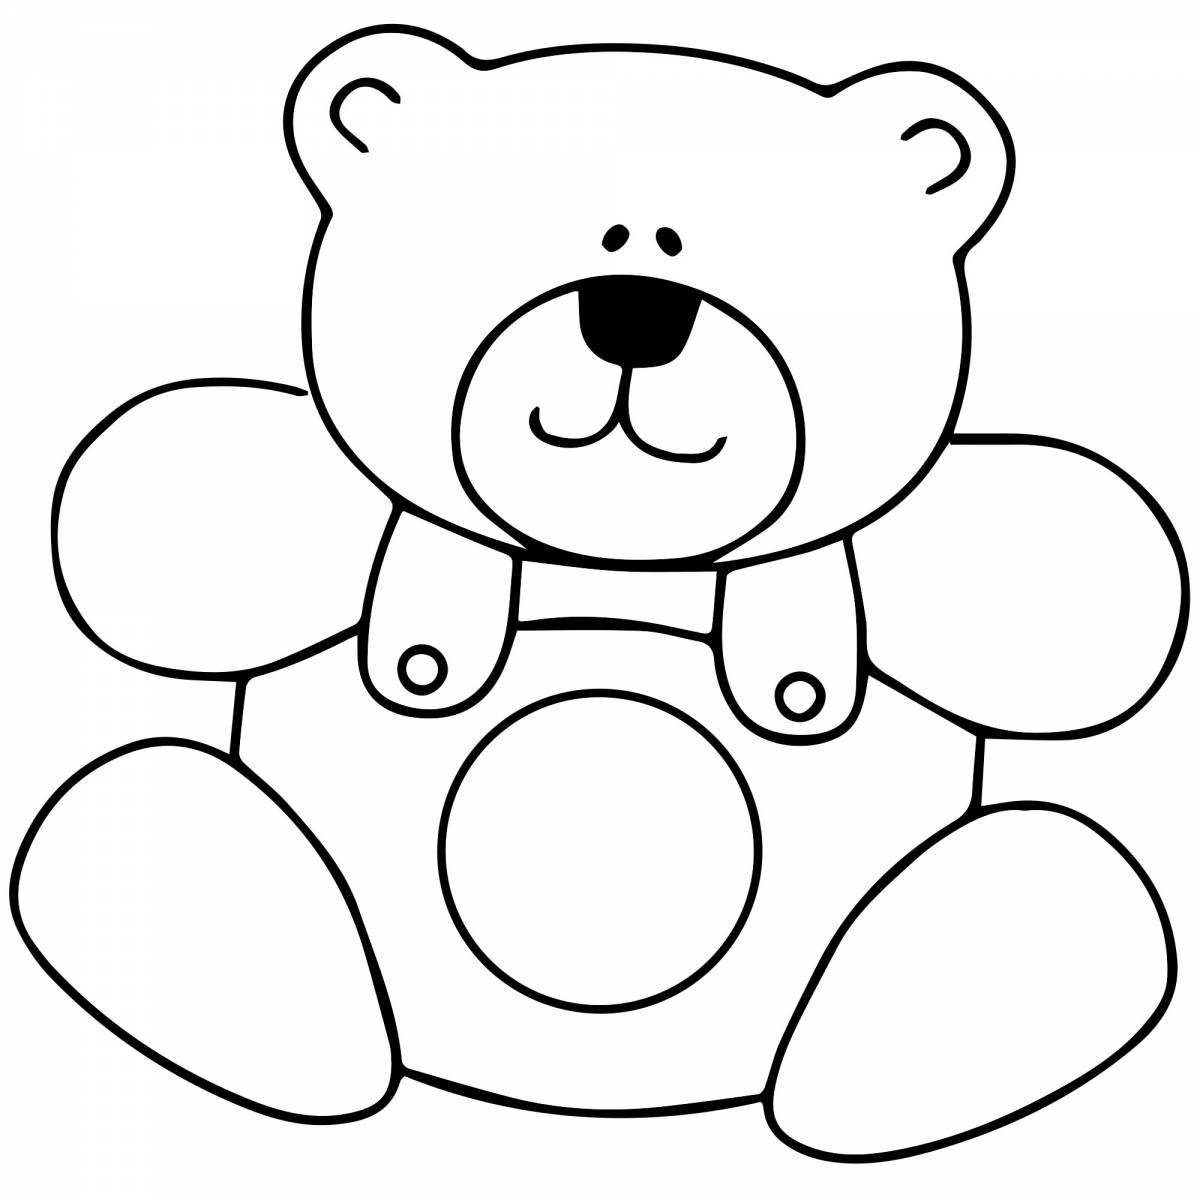 Crazy Bear coloring page